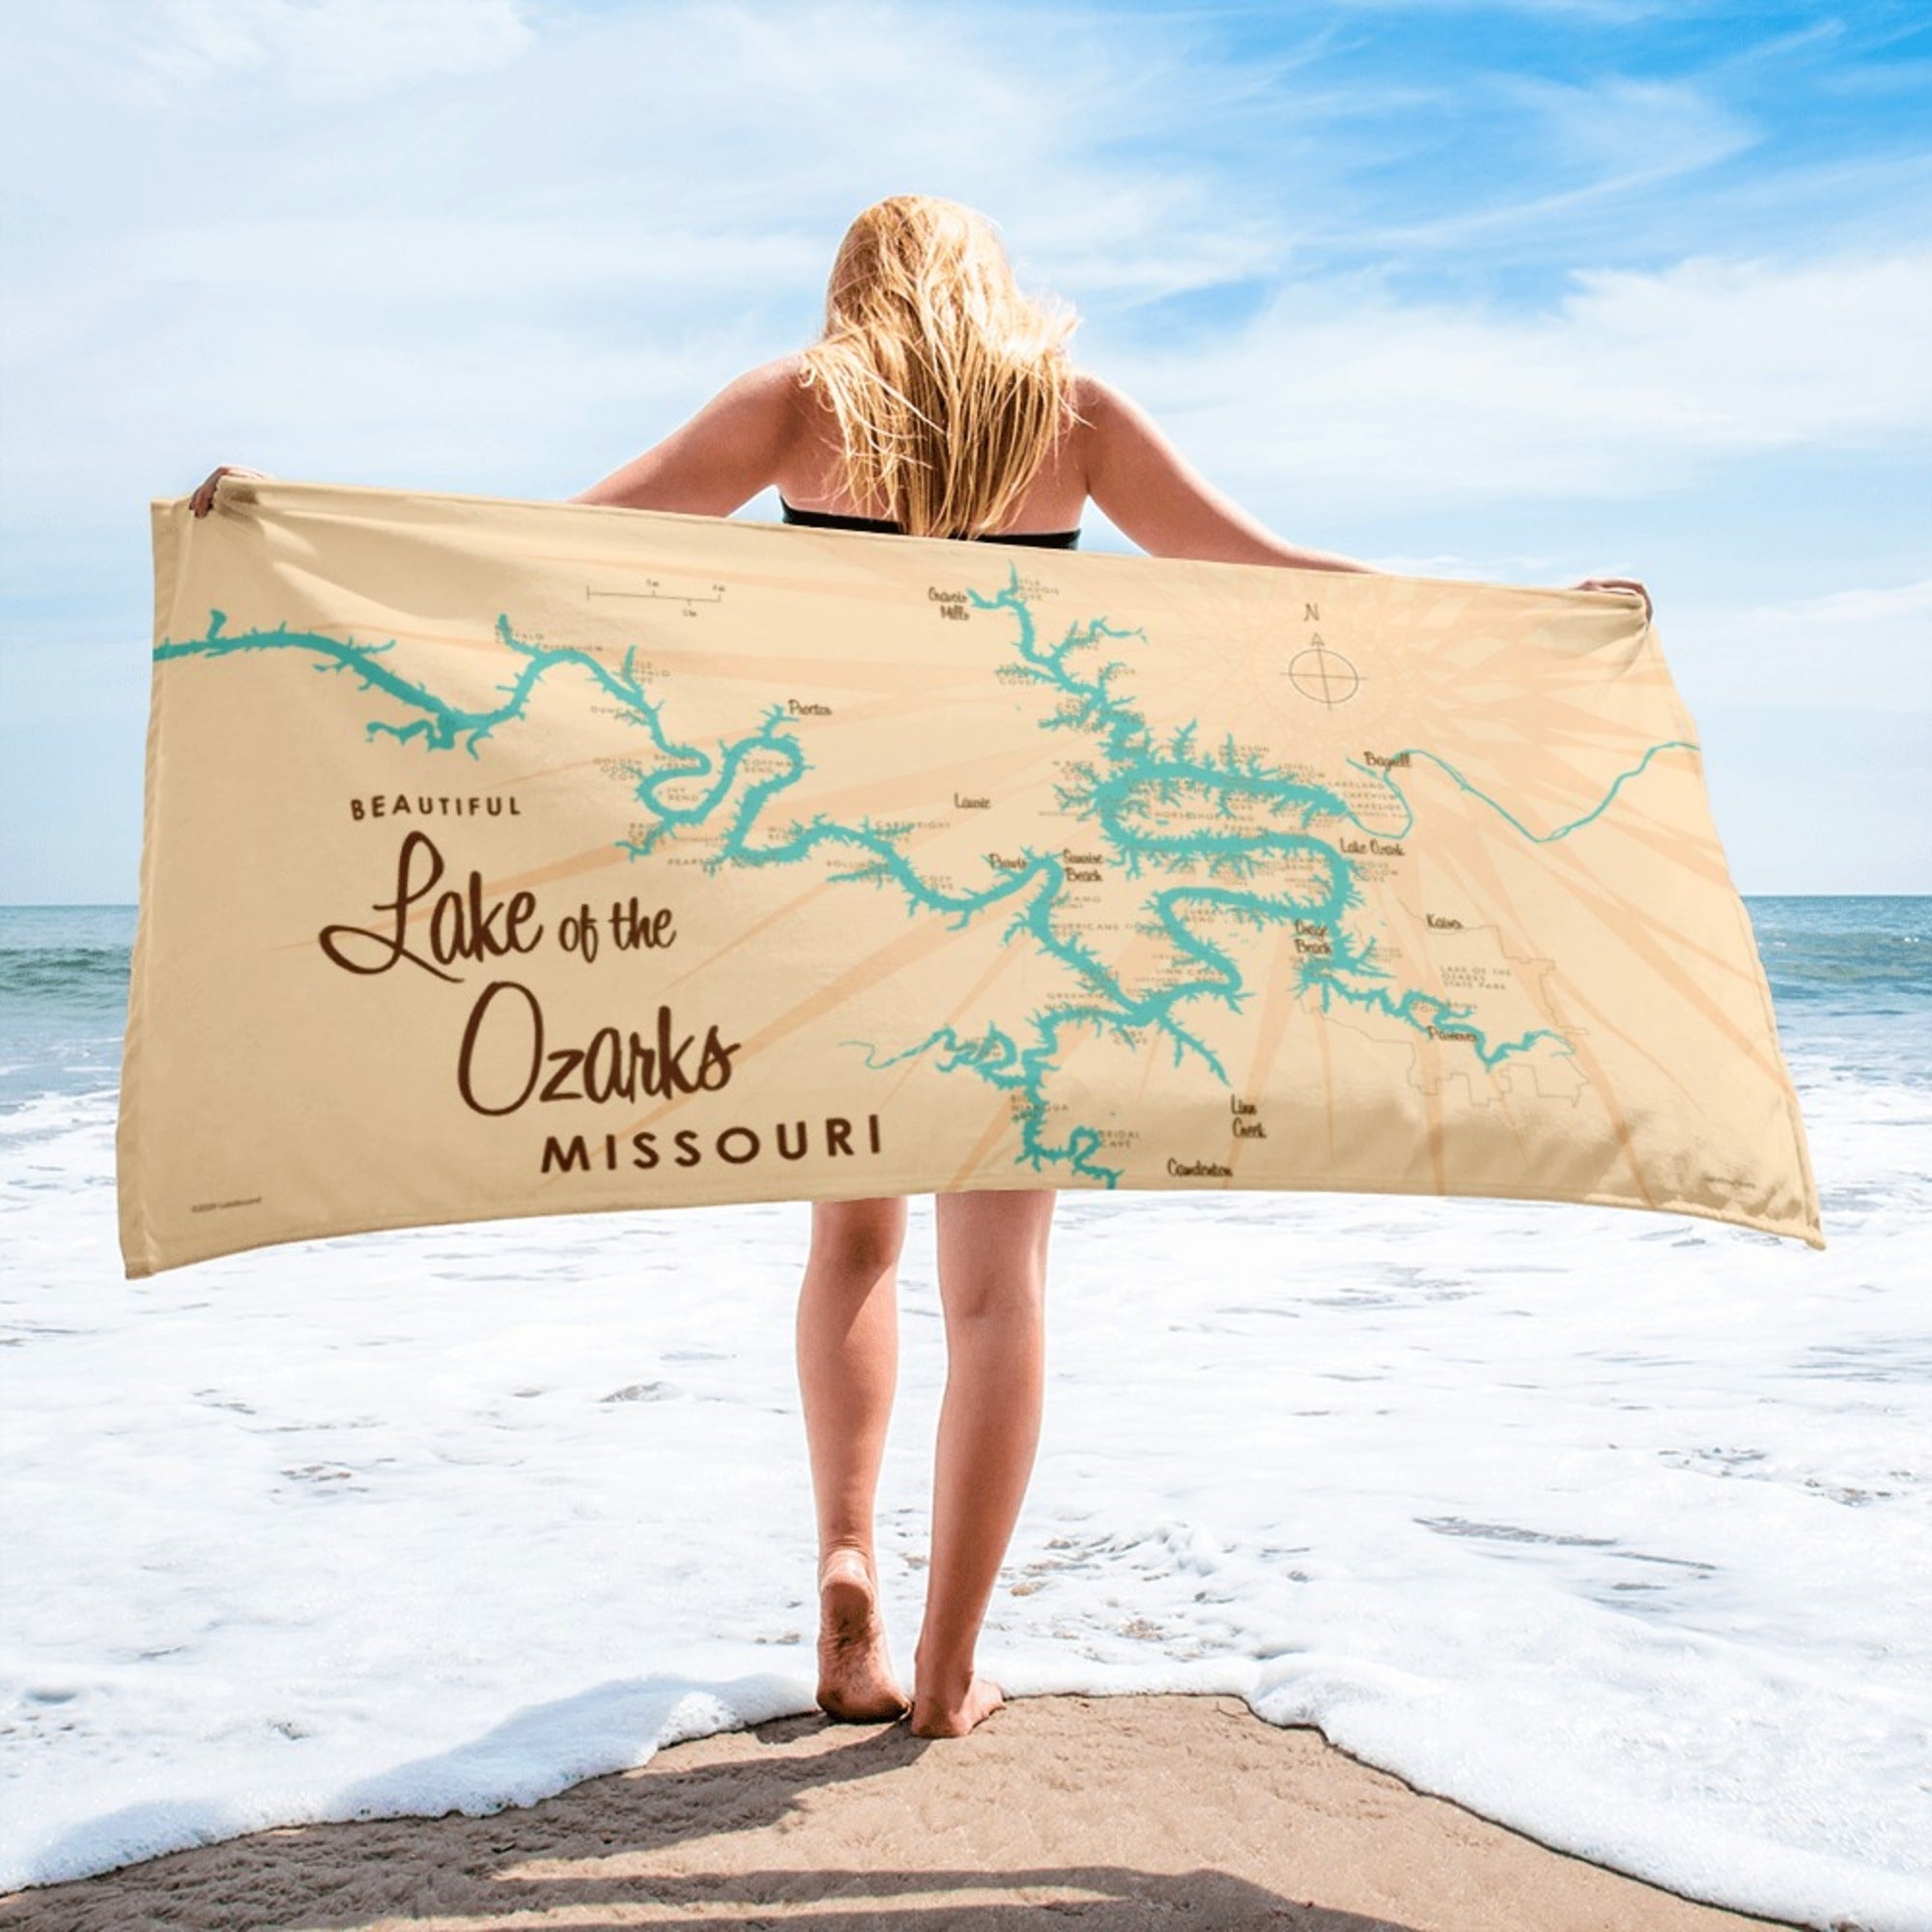 Lake of the Ozarks Missouri (with Mile Markers) Beach Towel